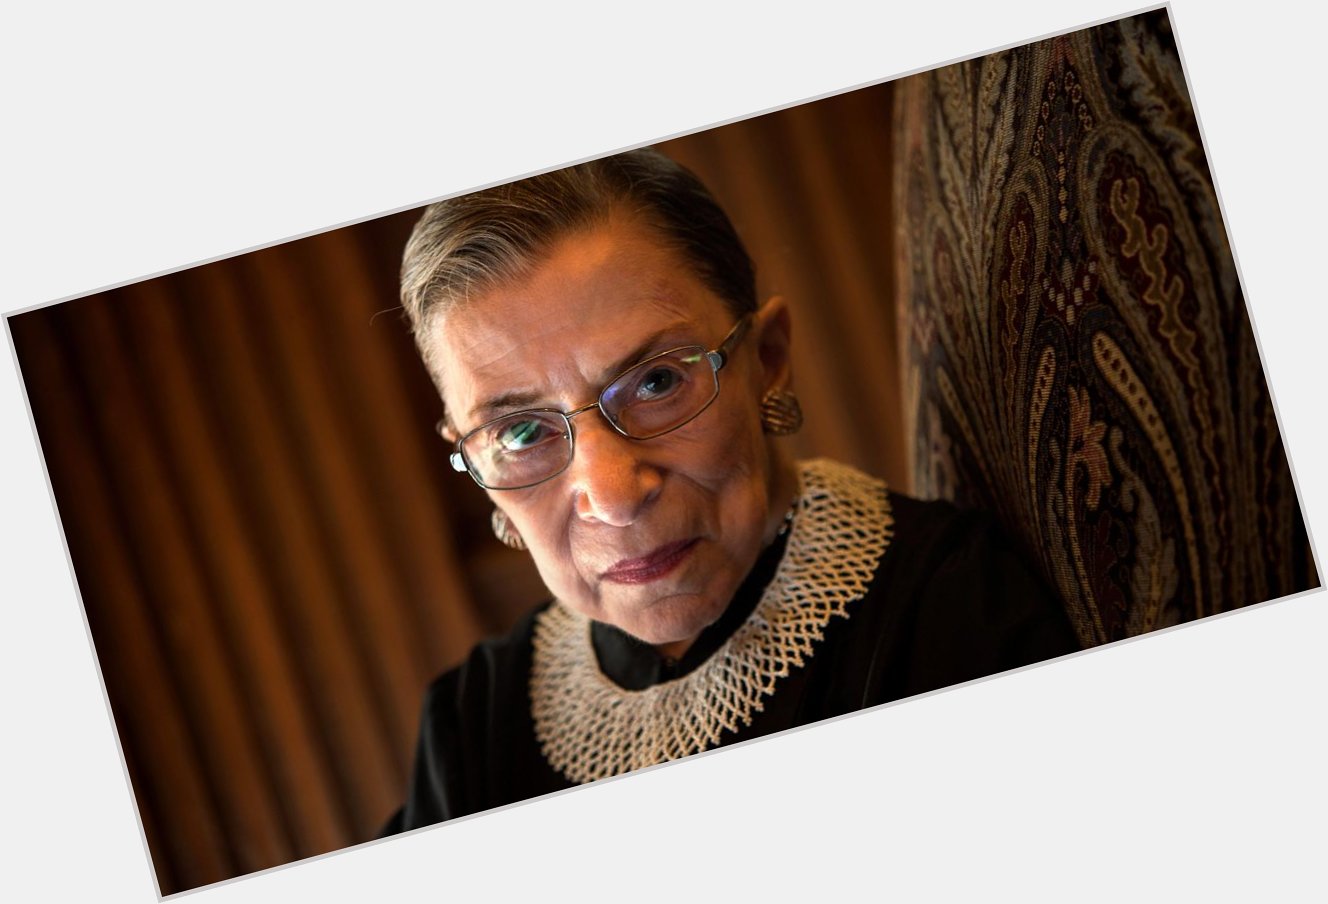 Happy birthday to Justice Ruth Bader Ginsburg! I wish her many more glorious, notorious years! 